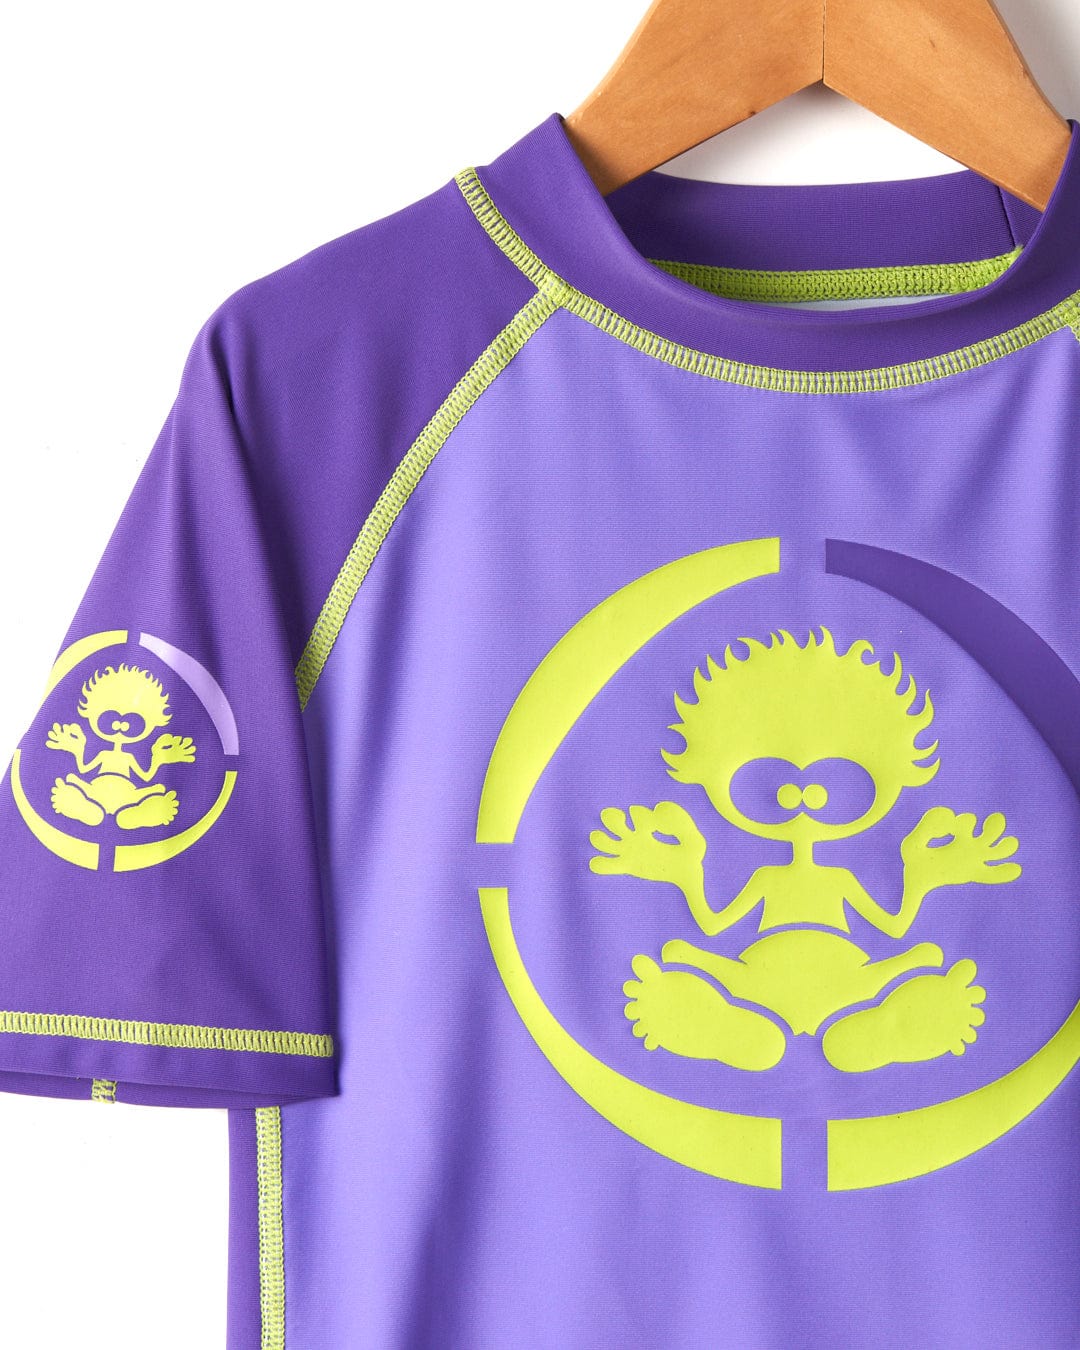 Purple Warp Icon - Recycled Kids Short Sleeve Rashvest by Saltrock with a neon yellow graphic of a cartoon character on a hanger against a white background, featuring UPF 50 protection.